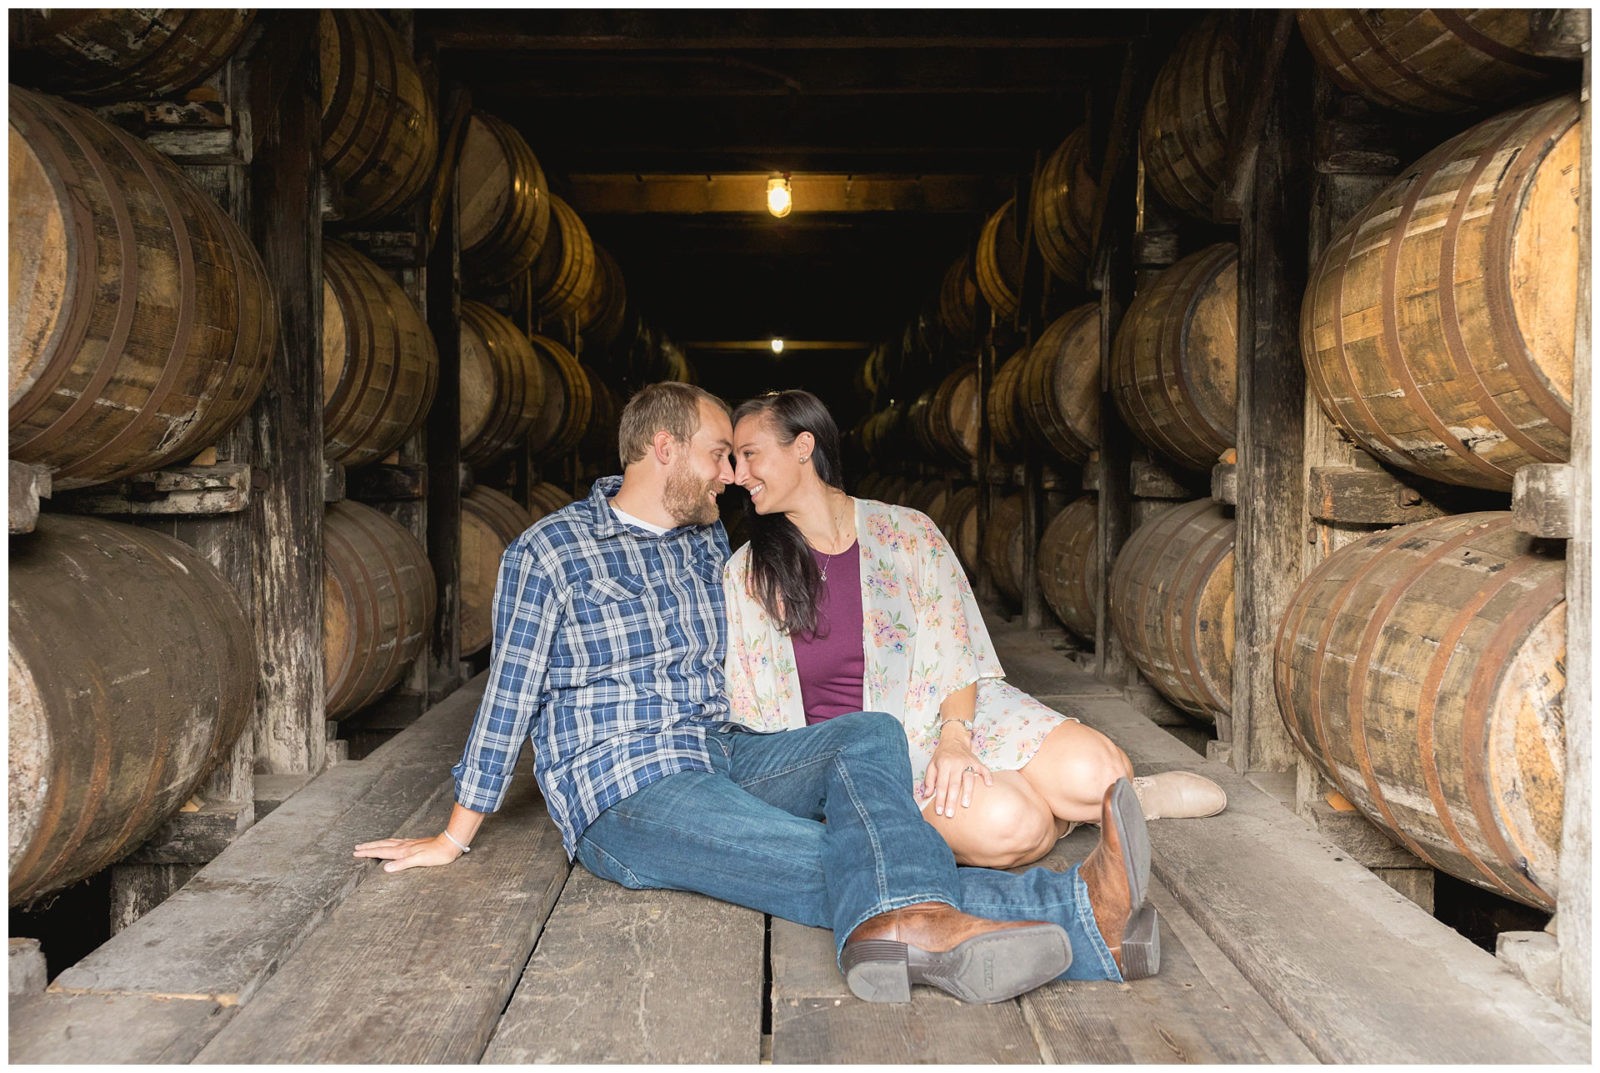 Engagement photos in the bourbon barrels warehouse at Buffalo Trace Distillery in Frankfort, KY